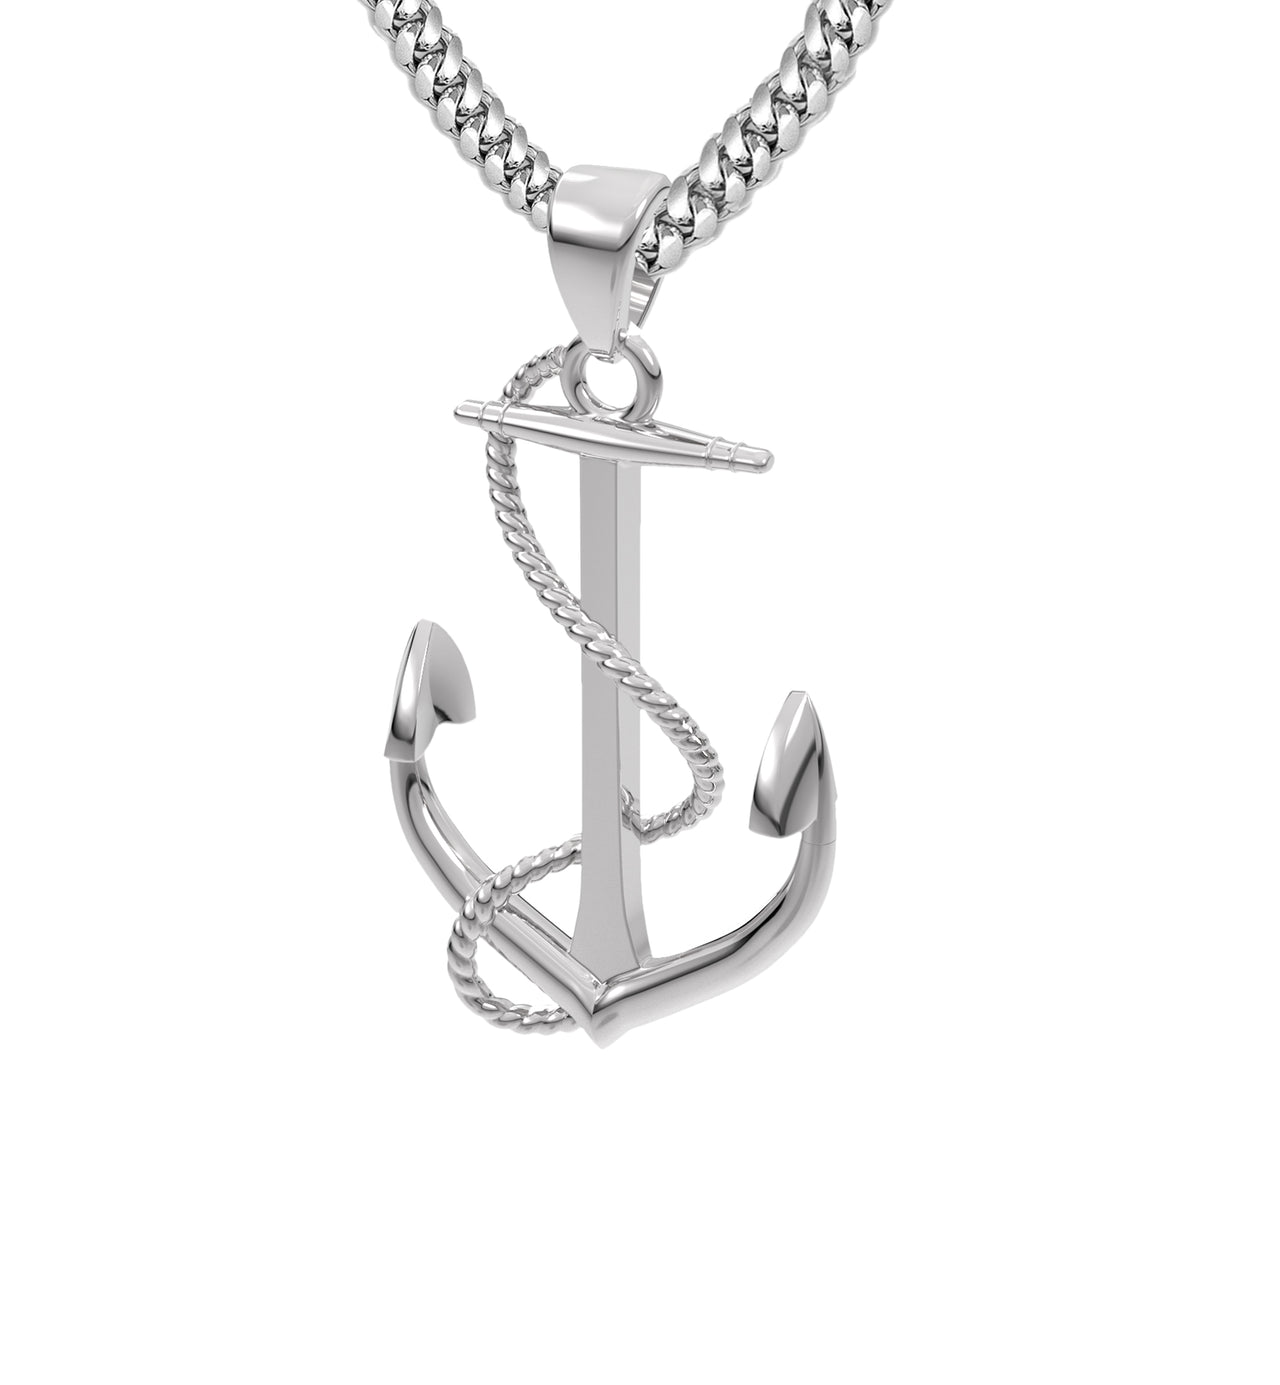 Men's 925 Sterling Silver High Polished Nautical Anchor Pendant Necklace, 30mm